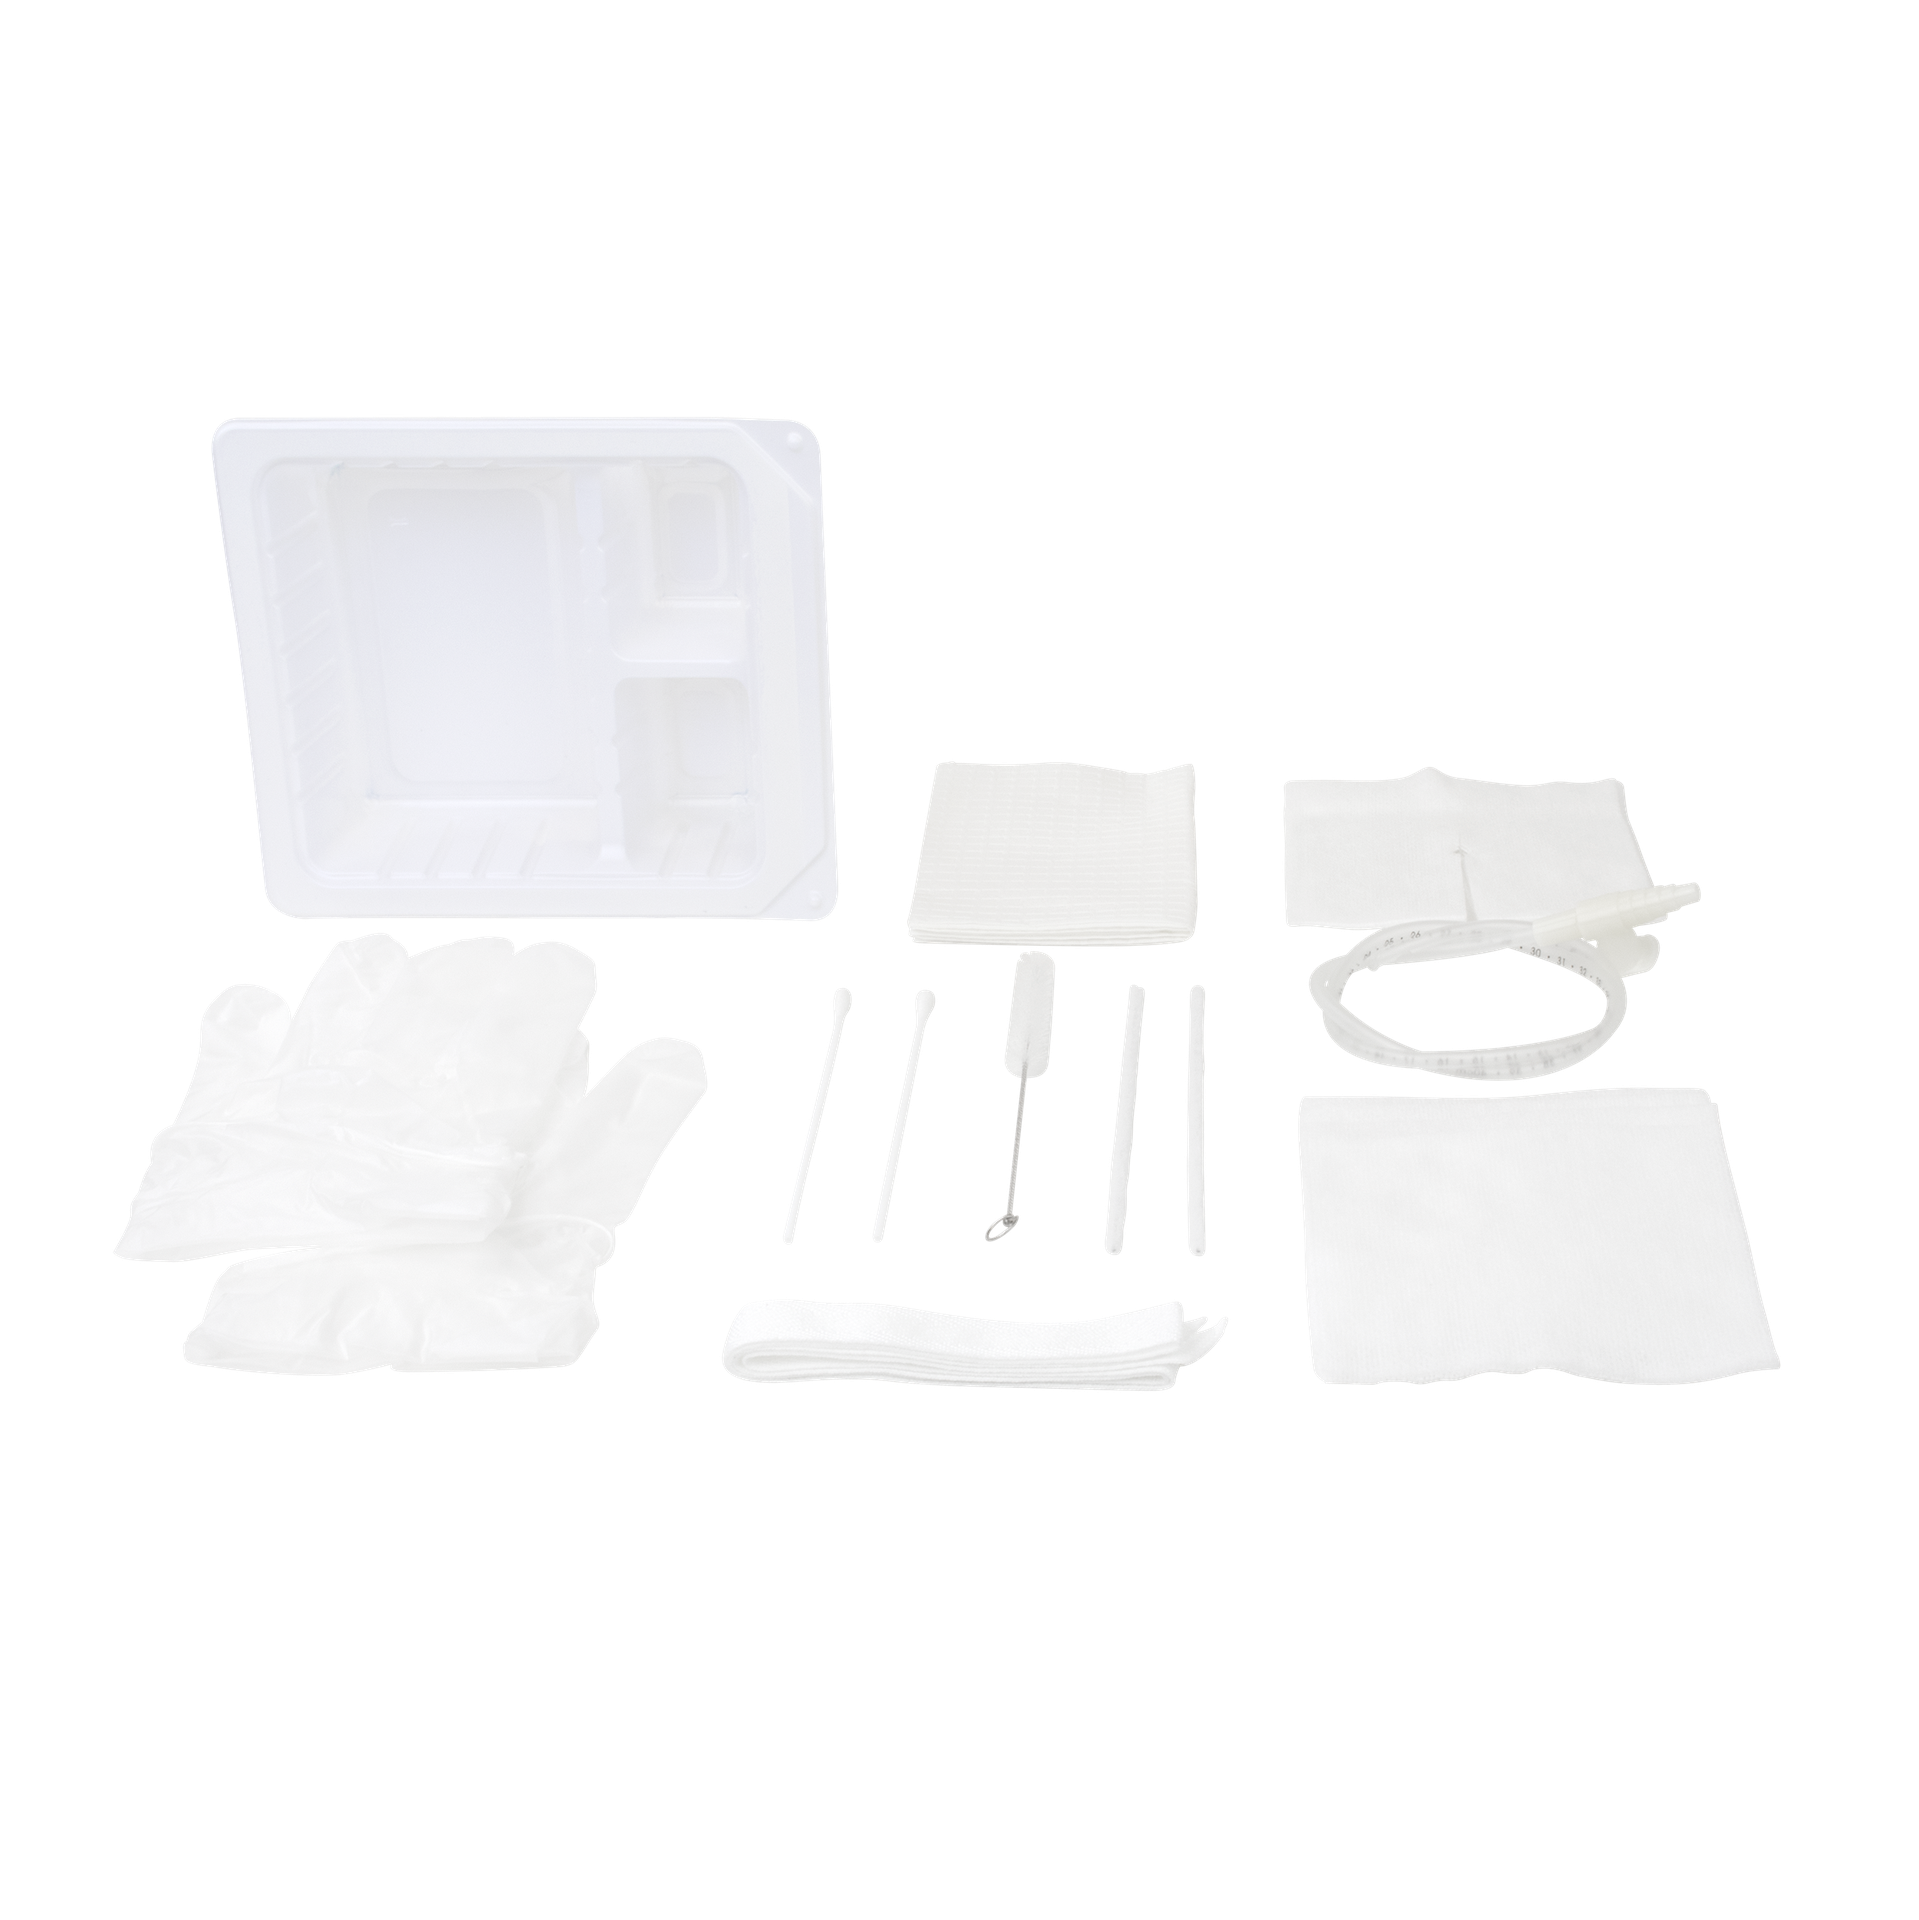 [DYN35002] Two Compartment Tray with Vinyl Gloves and 14FR Catheter